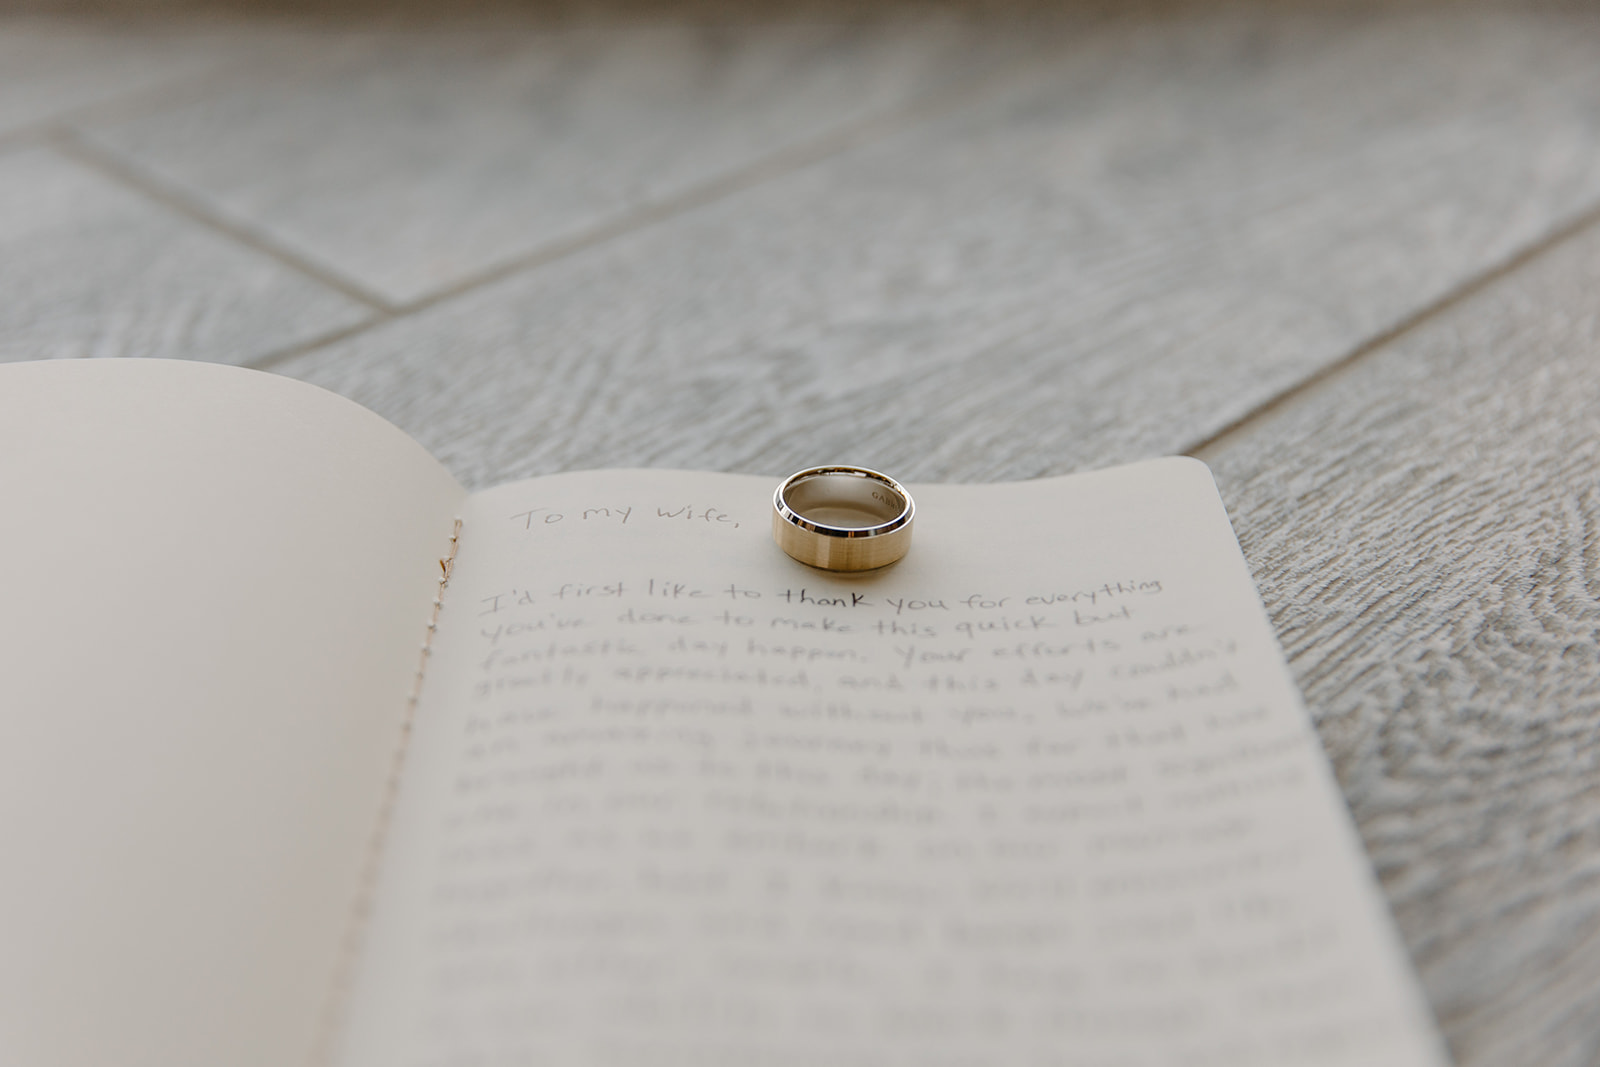 Wedding ring on vow book